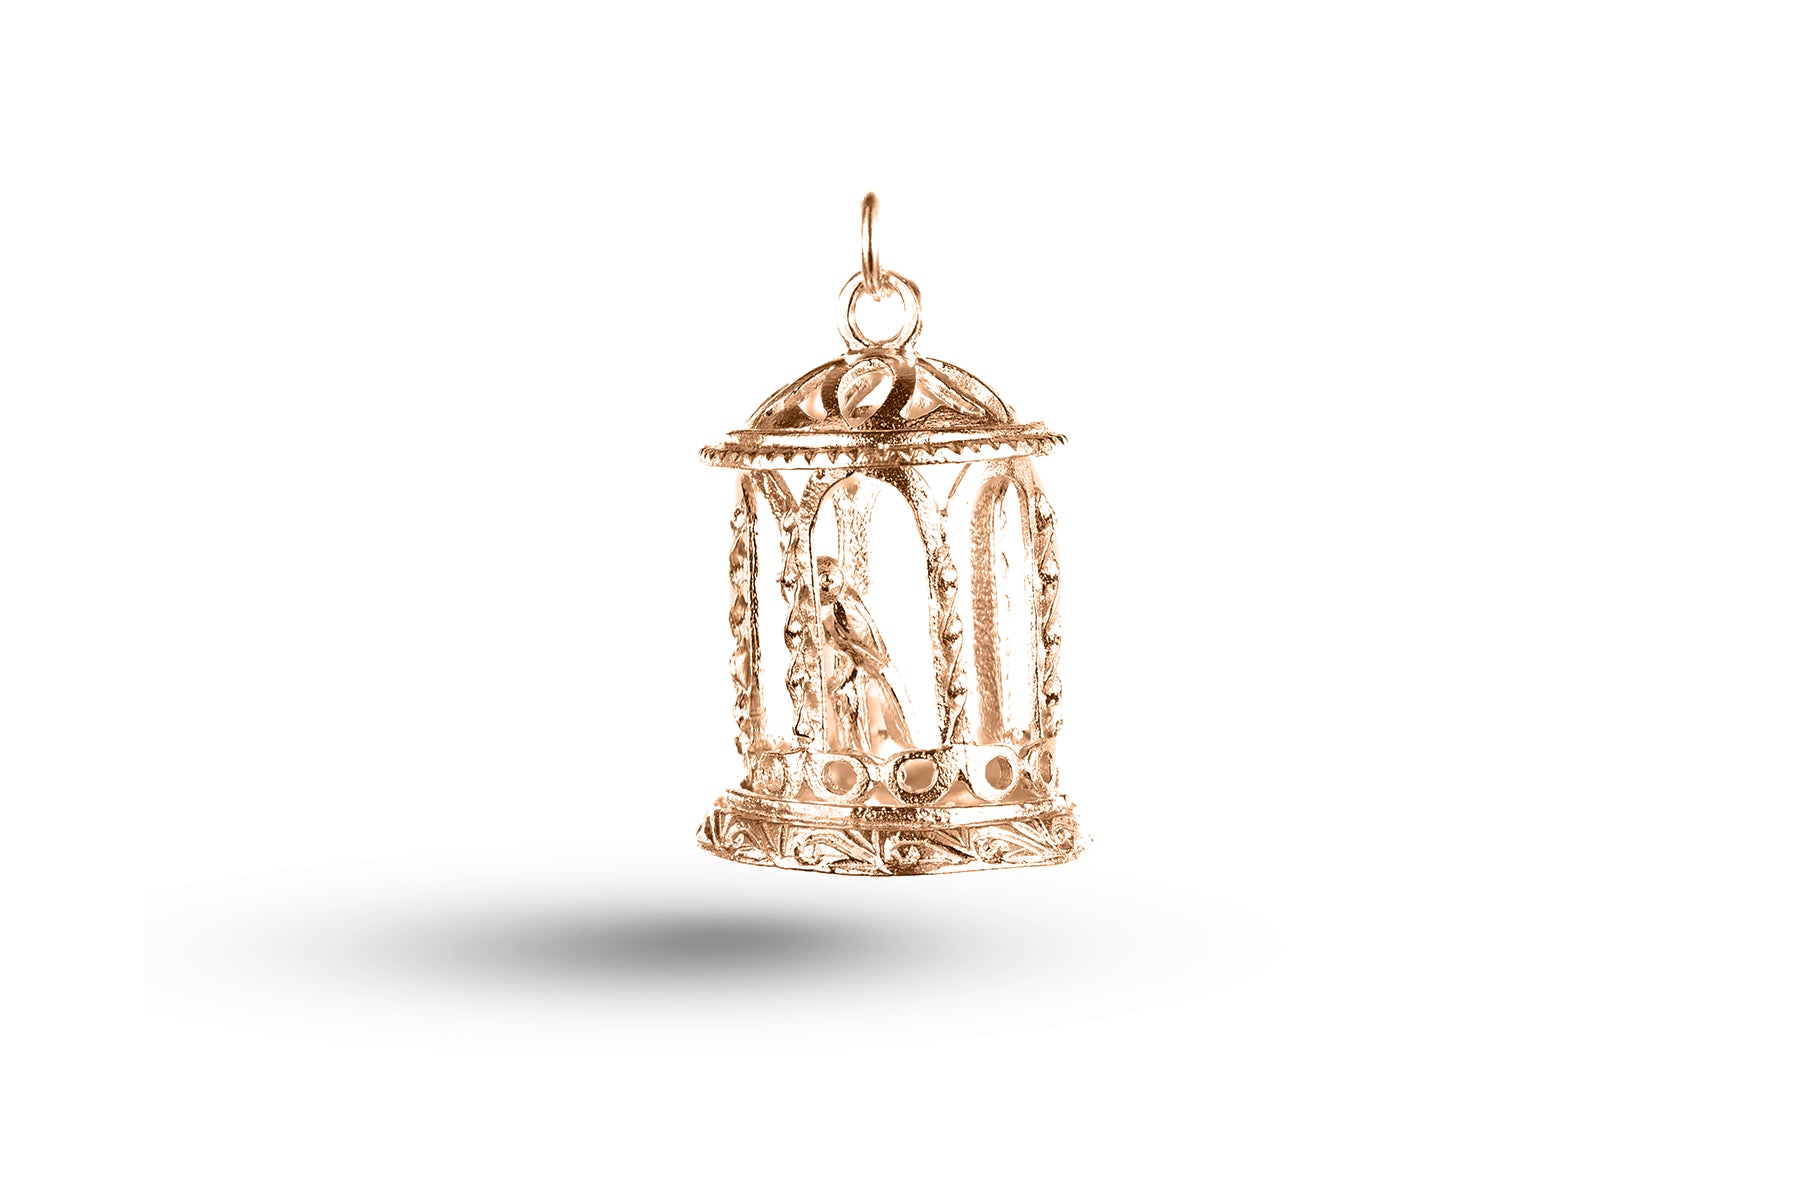 Luxury rose gold bird in cage charm.